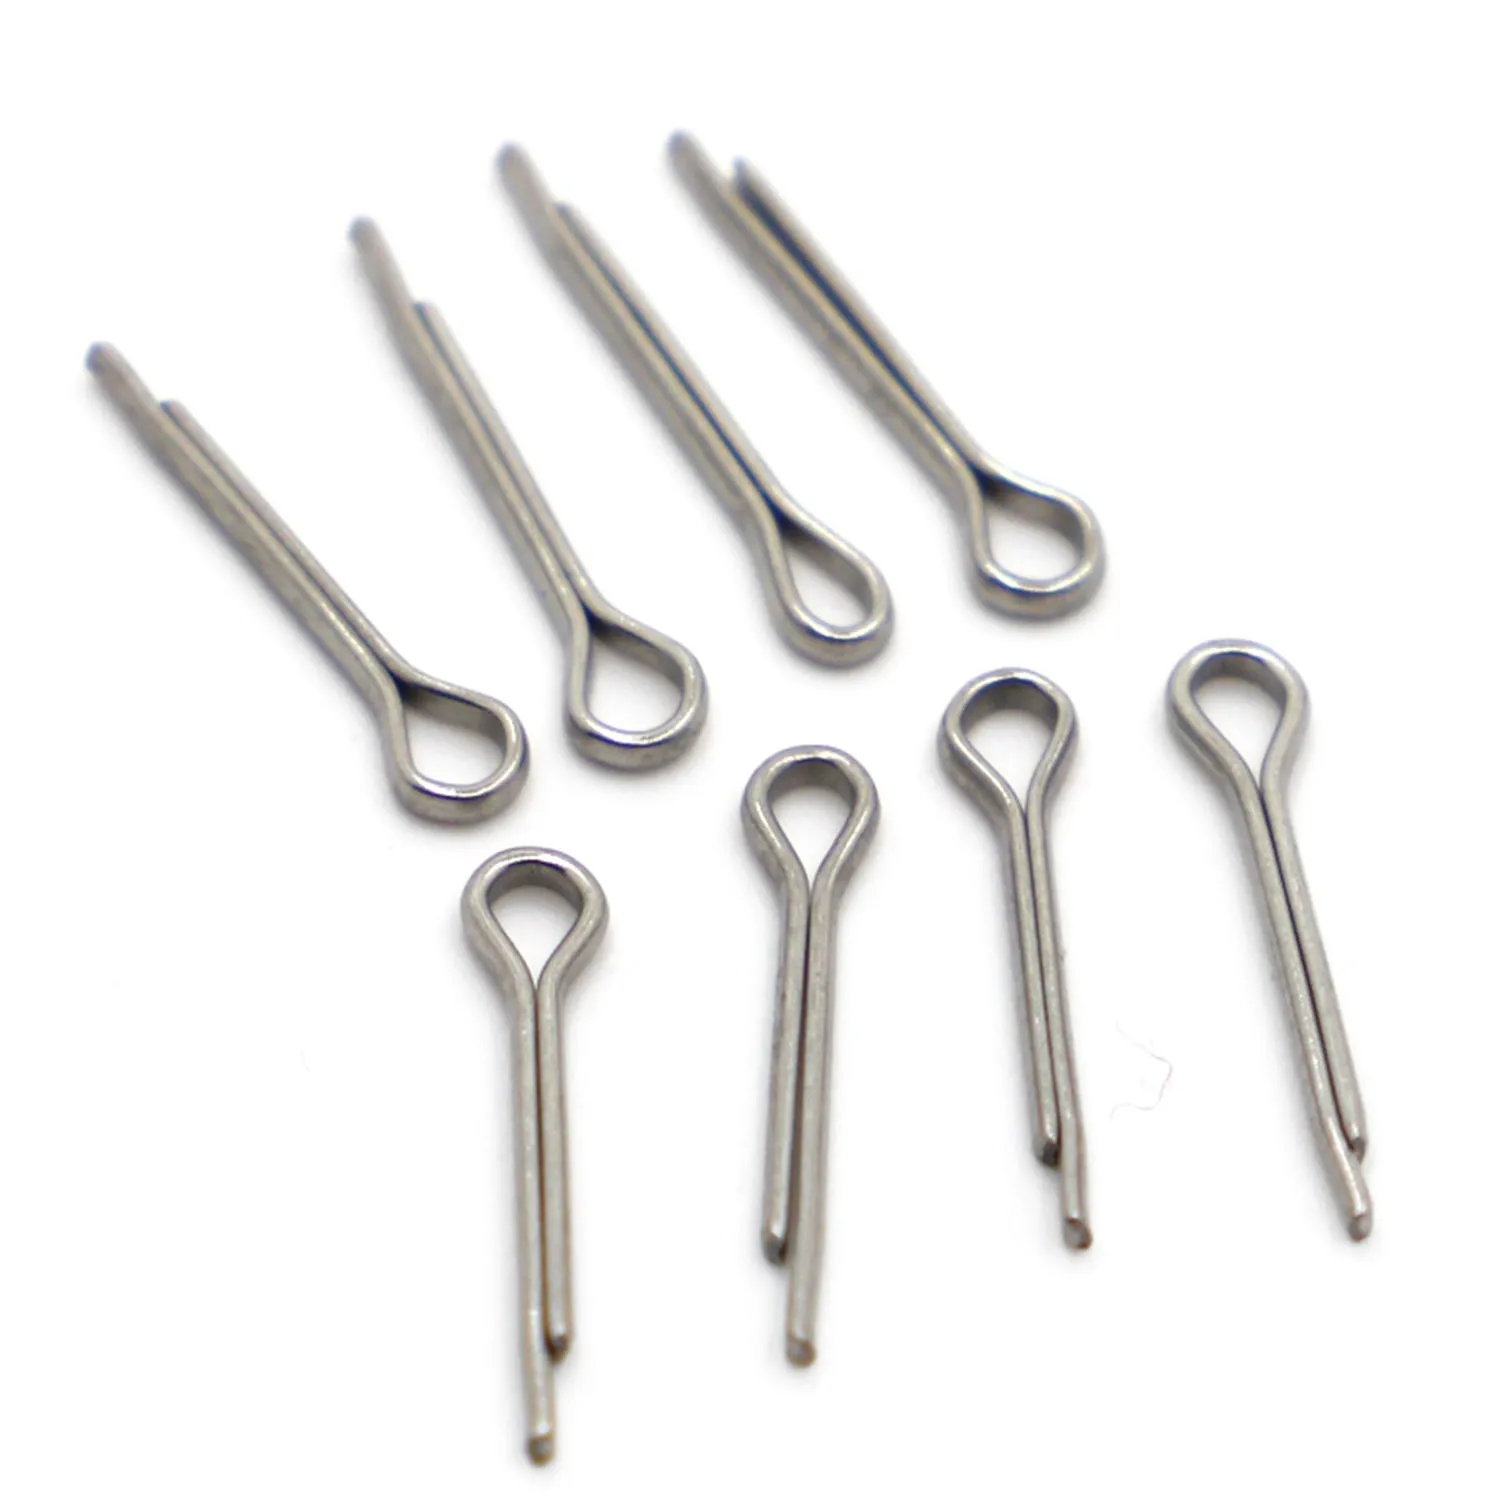 Sporting Stainless Steel U Shape Type Spring Cotter Hair Pin M1 M1.2 M1.5 M2 M3  - £23.89 GBP